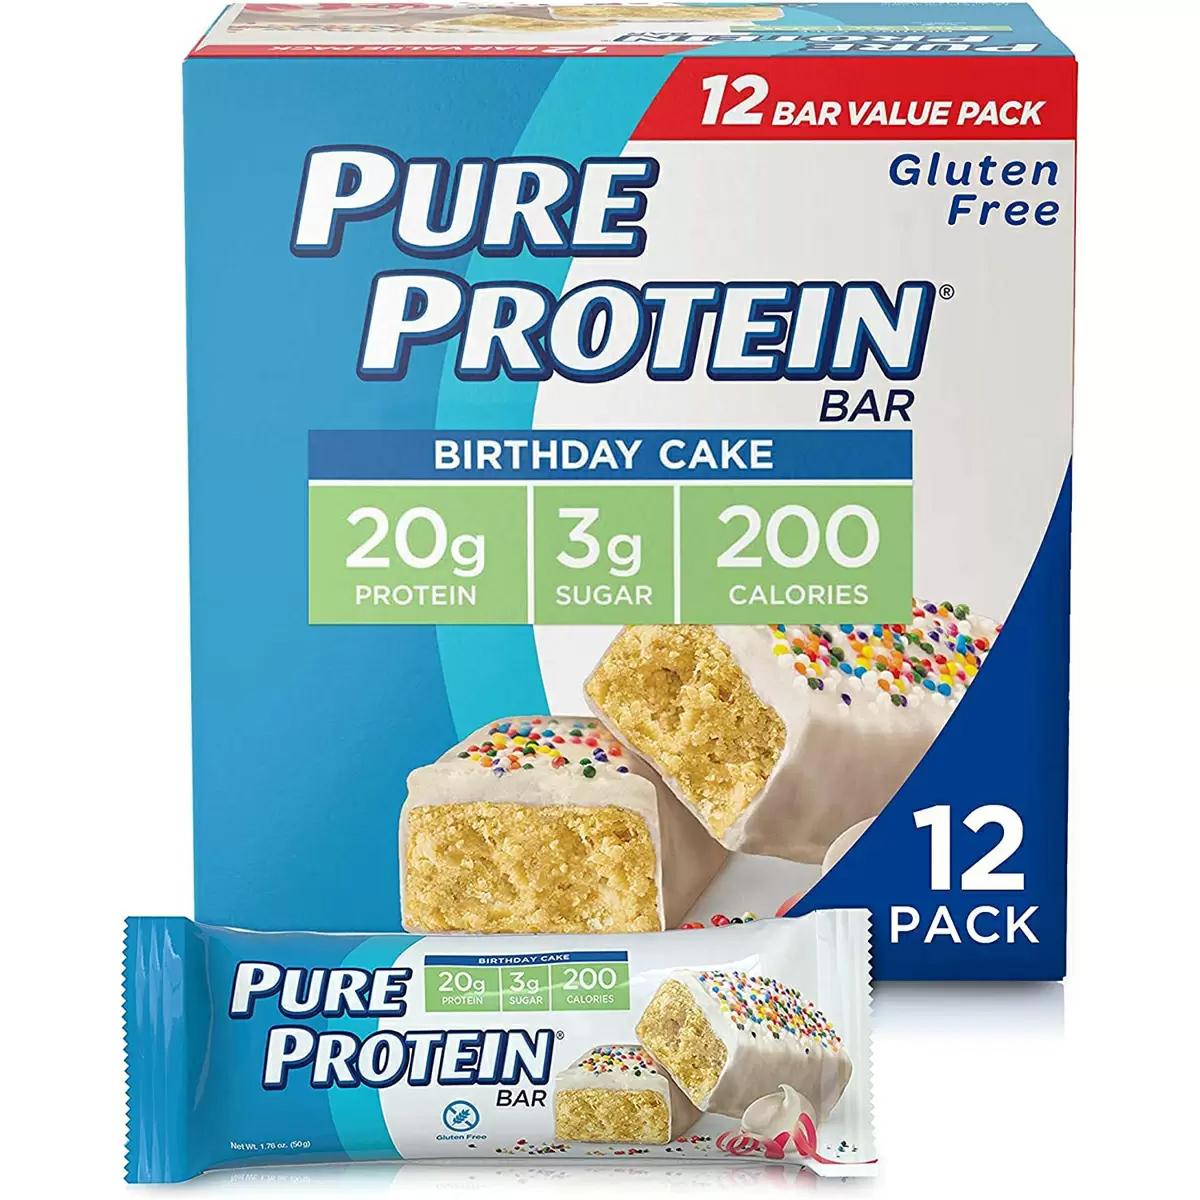 12 Pure Protein Birthday Cake Protein Bars for $8.60 Shipped